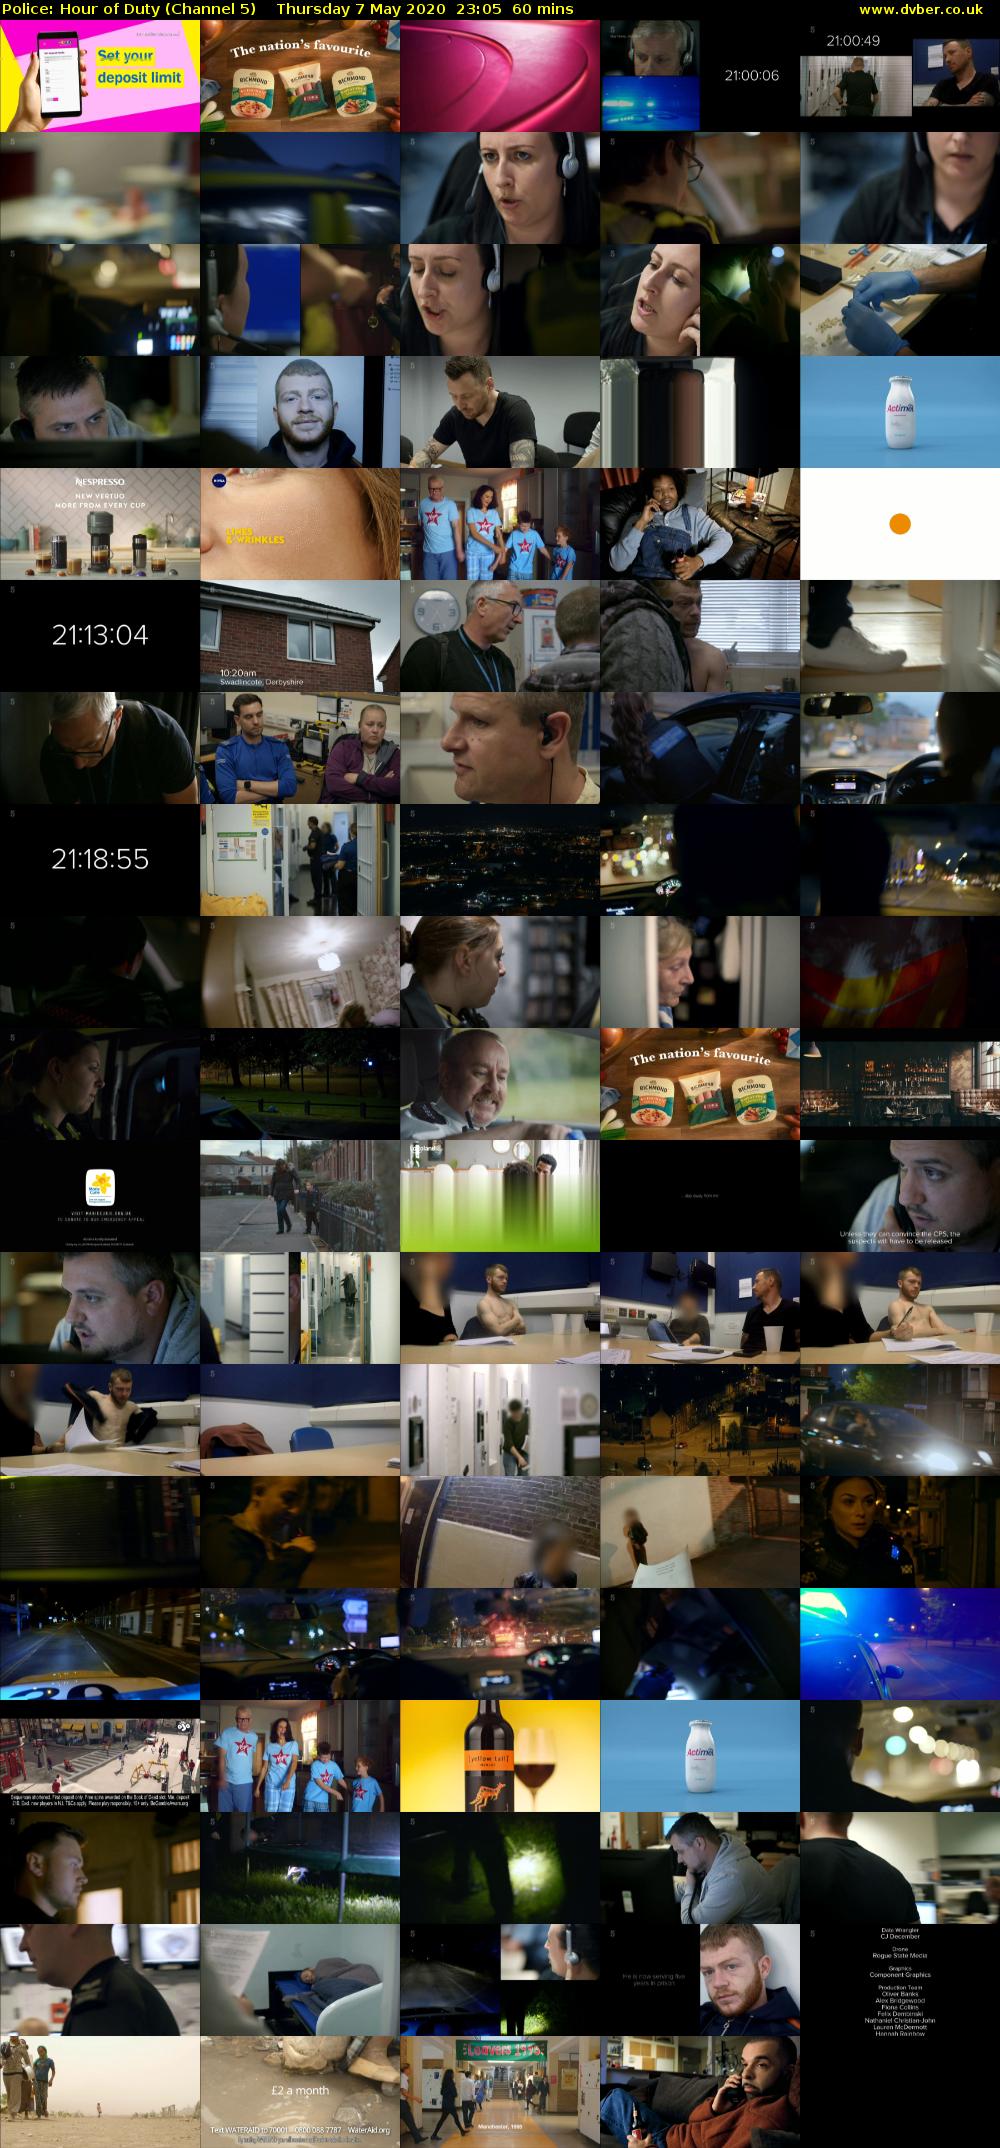 Police: Hour of Duty (Channel 5) Thursday 7 May 2020 23:05 - 00:05